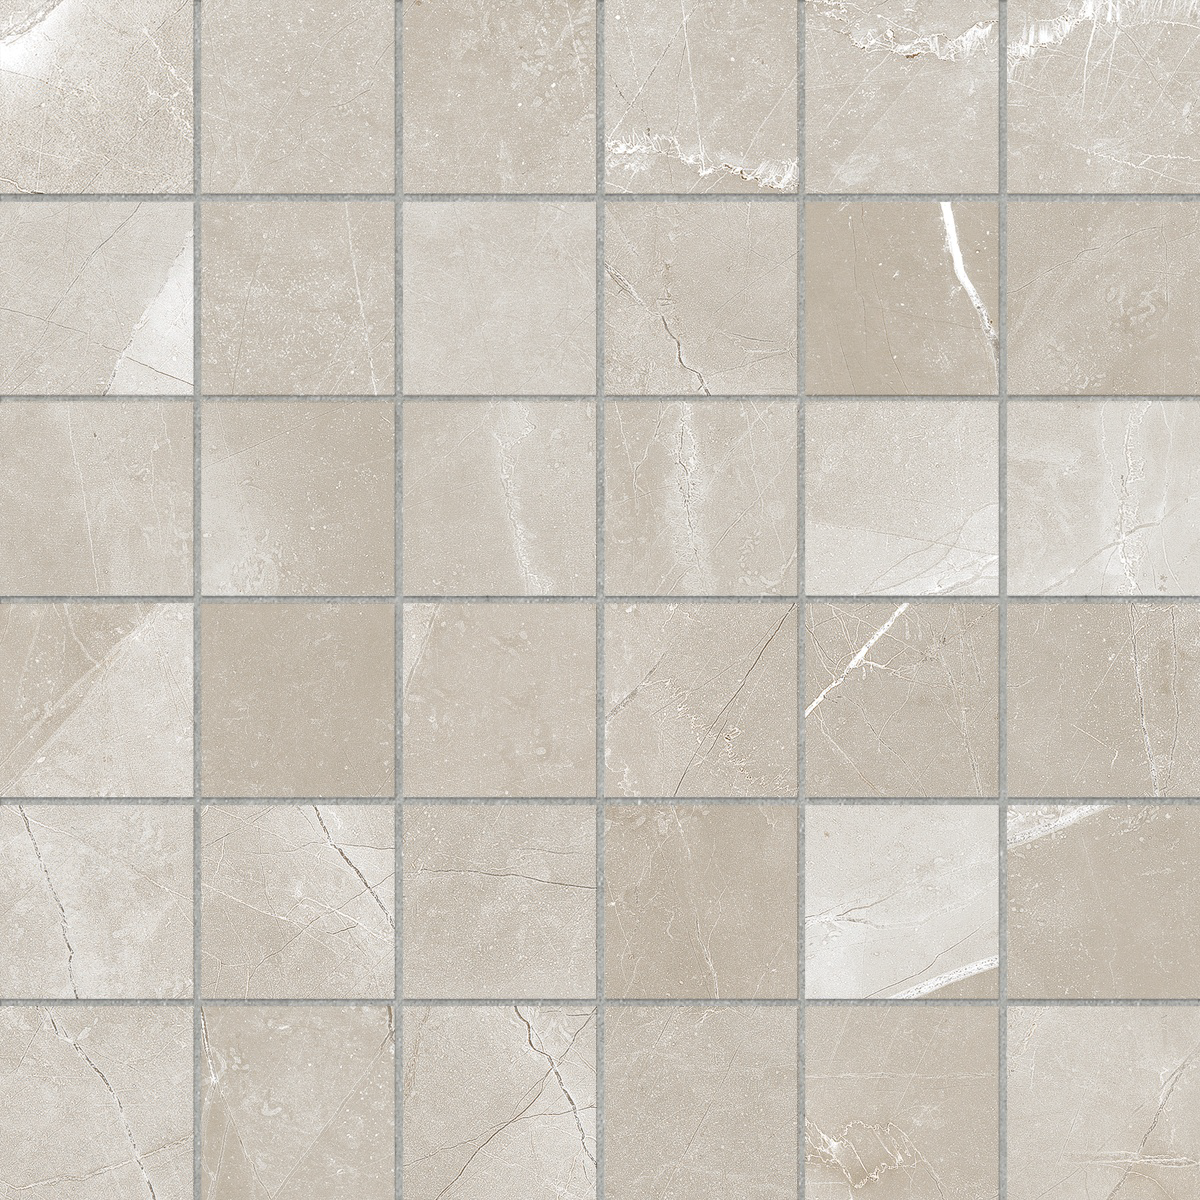 pulpis grey straight stack 2x2-inch pattern glazed porcelain mosaic from classic anatolia collection distributed by surface group international matte finish straight edge edge mesh shape